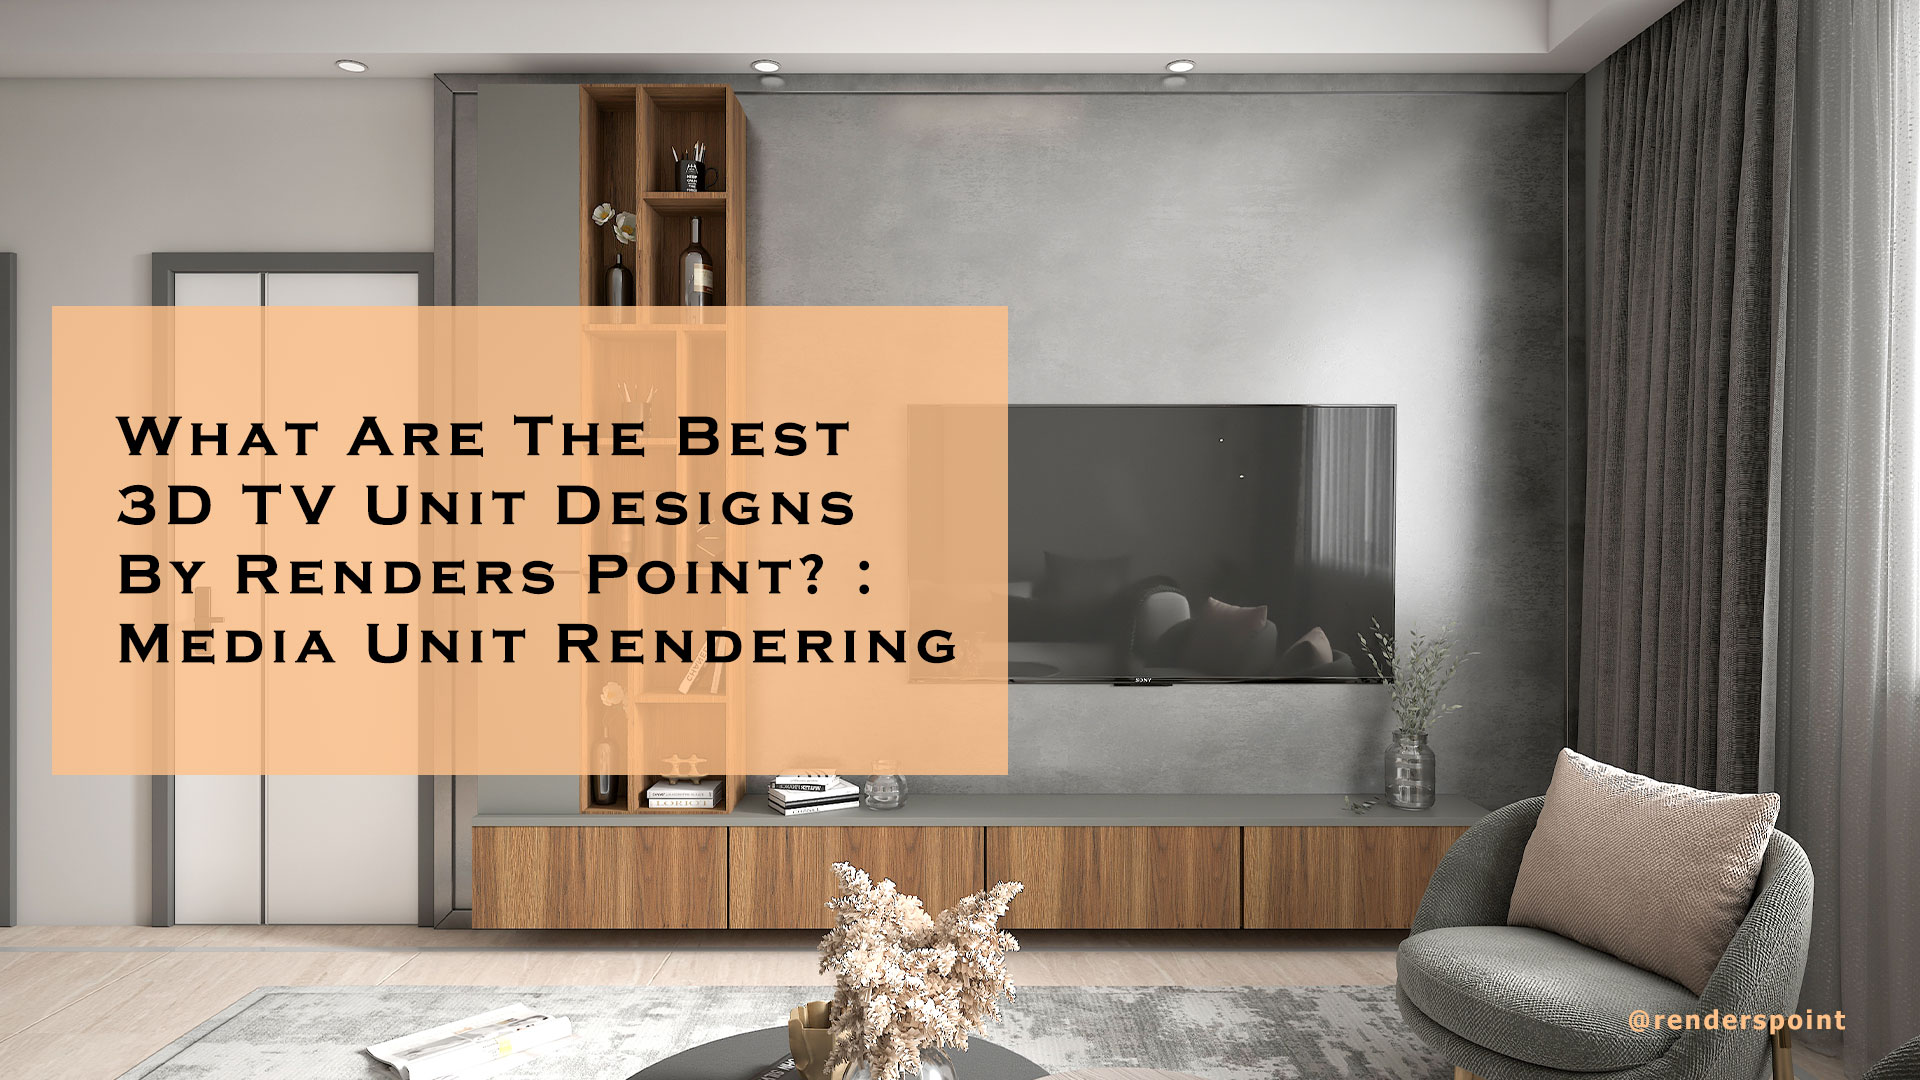 What are the Best 3D TV Unit Designs by Renders Point? : Media Unit Rendering